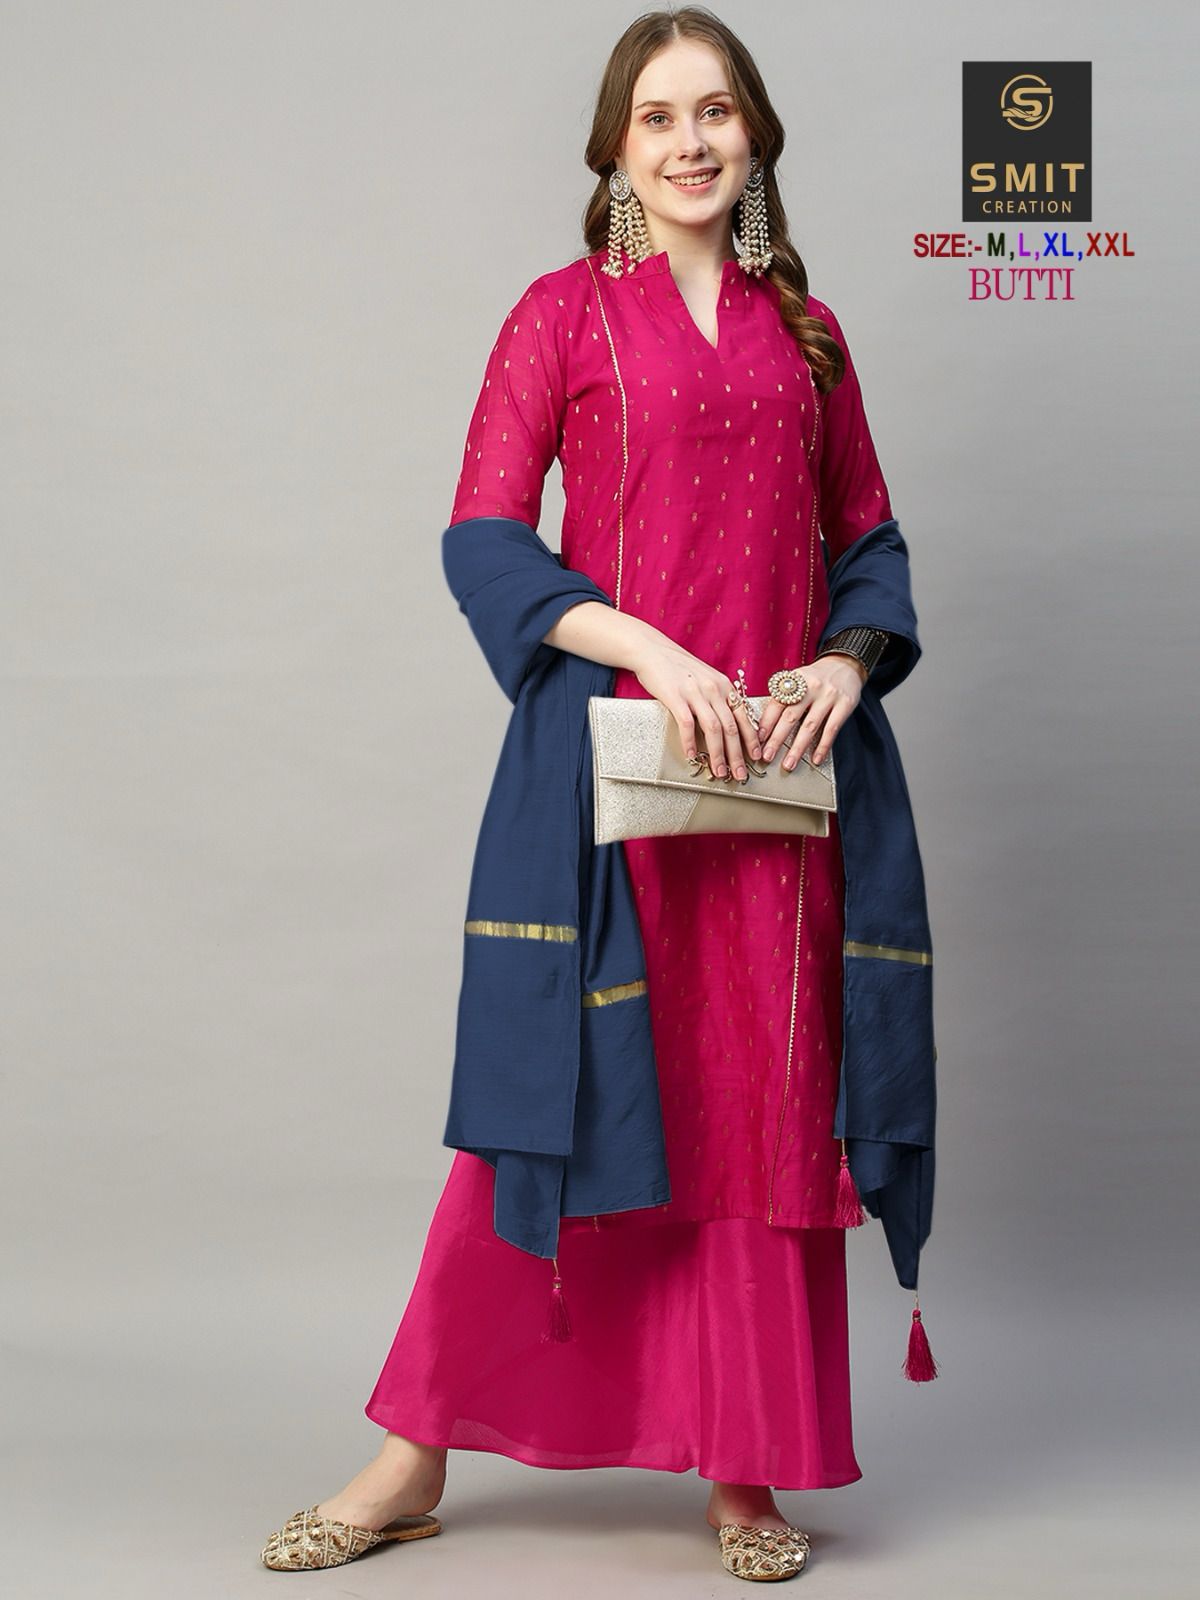 Butti Smit Creation Chanderi Readymade Plazzo Style Suits